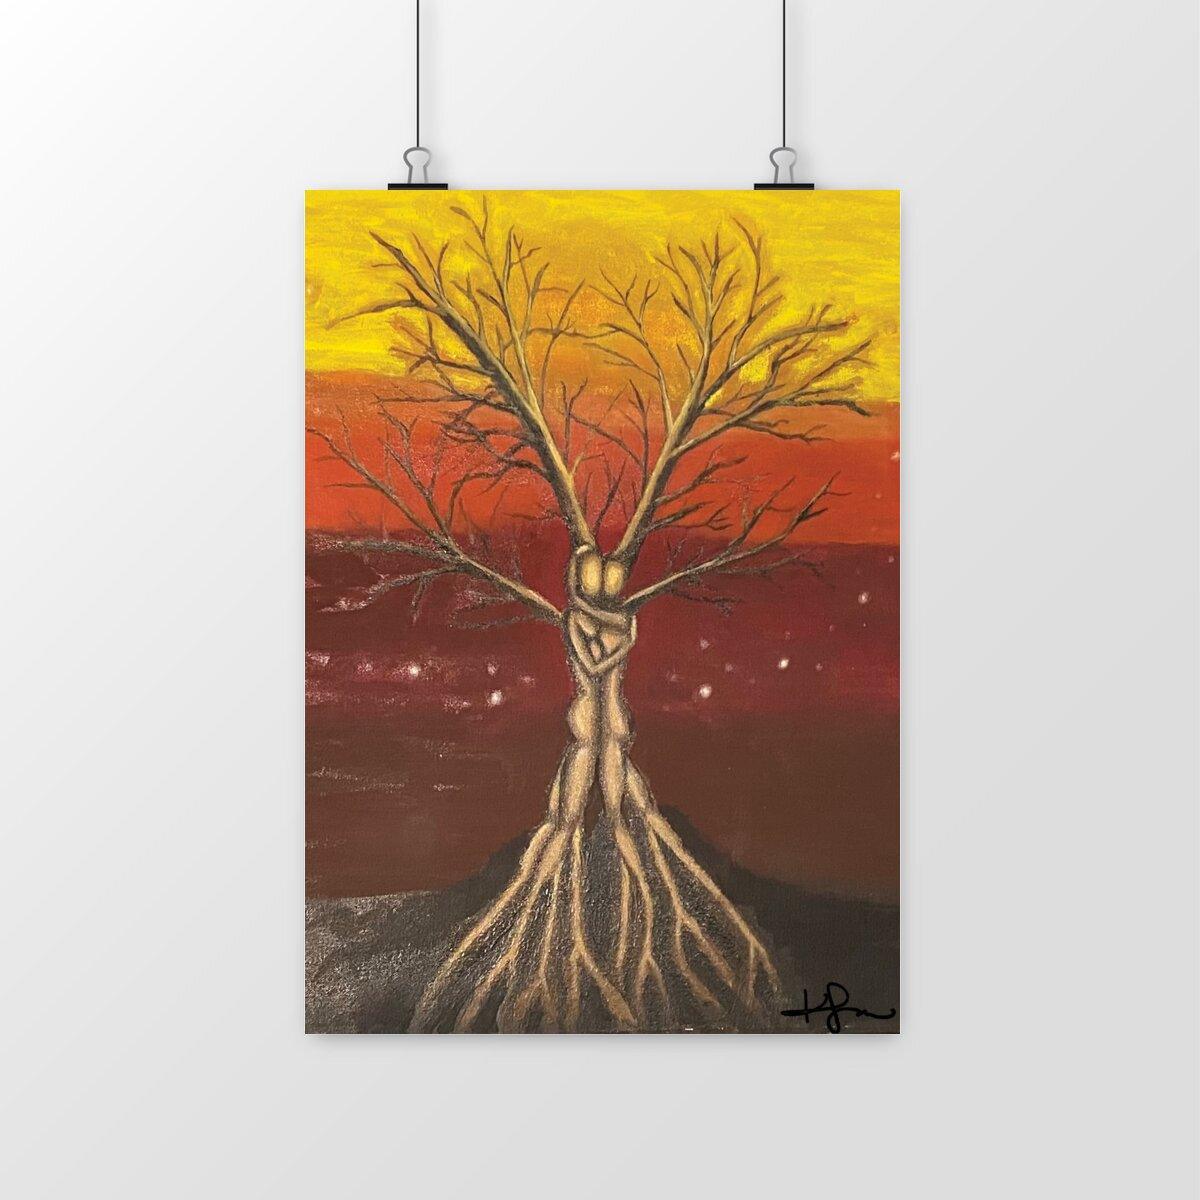 Tree of Life by Katherin Joyette, museum quality holistic art print, embodies spiritual and cultural depth, available at Tree of Life Art.